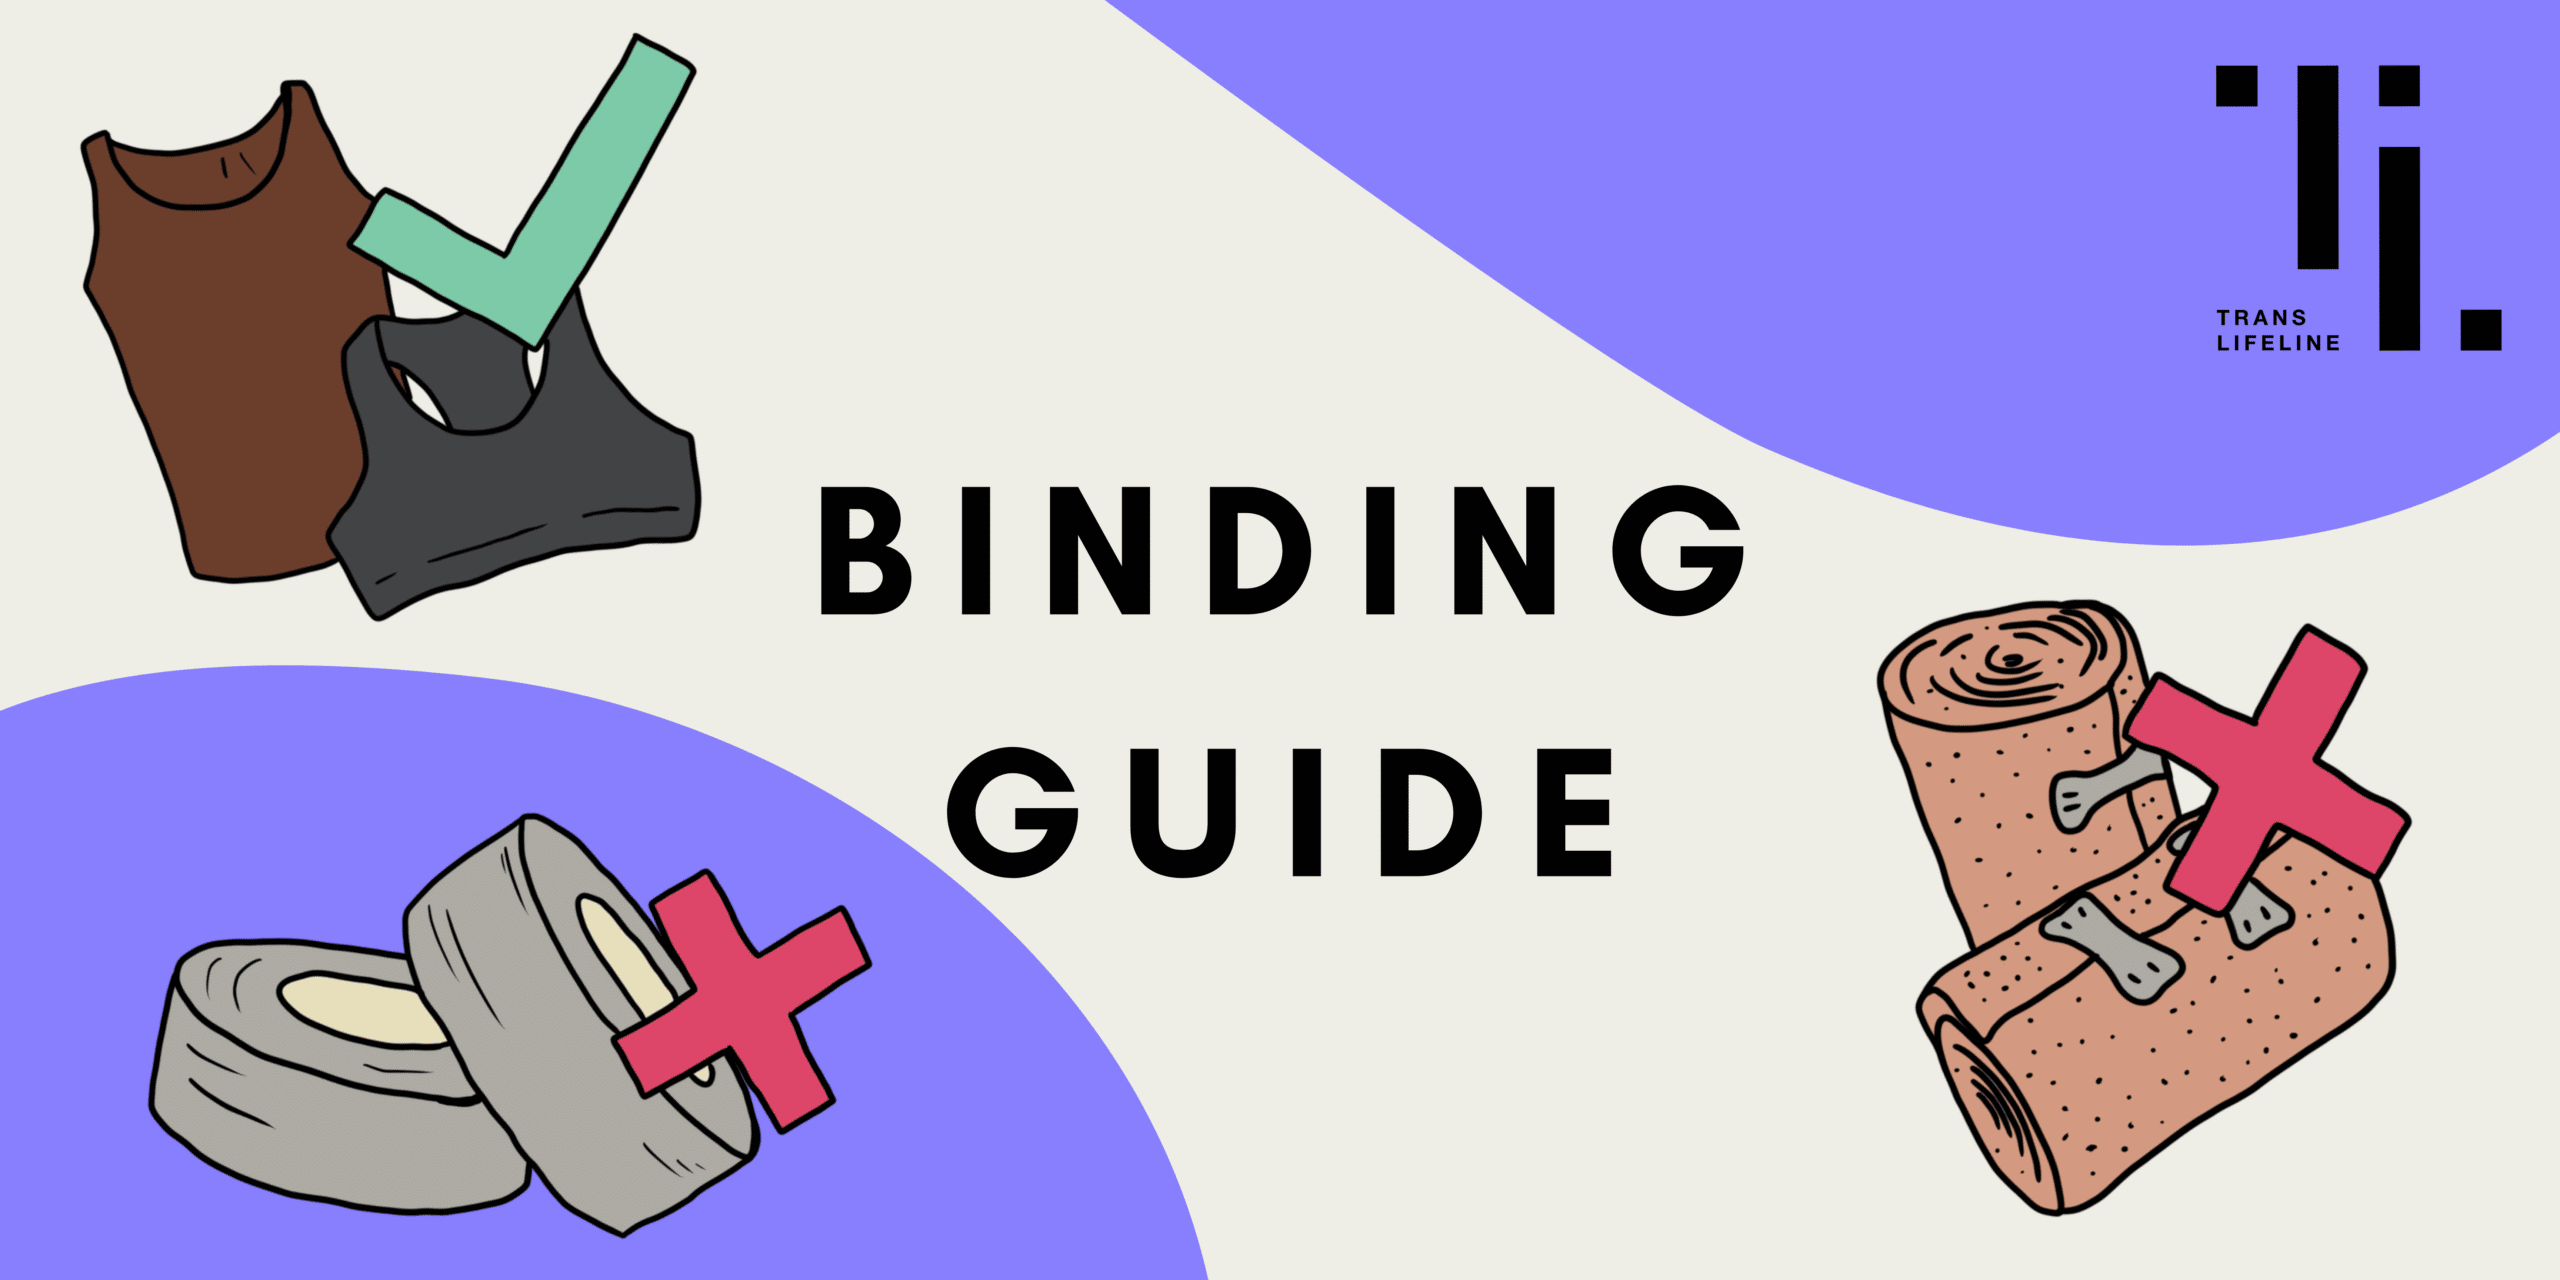 A Binding Guide for All Genders and Gender Expressions - Trans